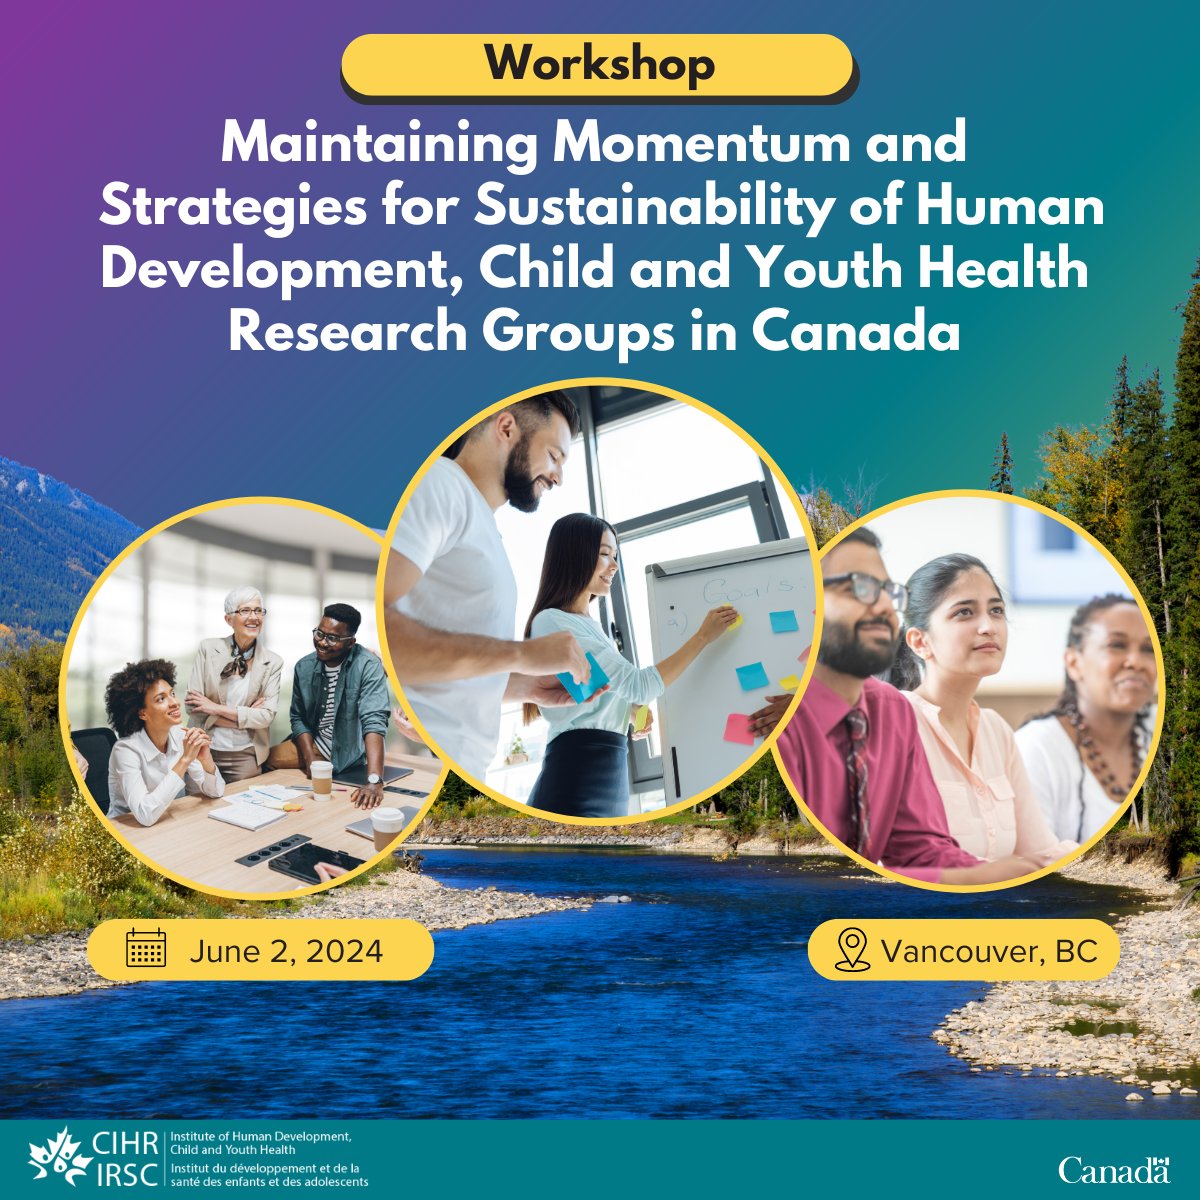 #IHDCYH is hosting a workshop on 6/2 in Vancouver as part of the Perinatal & Child Health Research Annual Mtg to bring together research groups in our mandate area to explore strategies for maintaining momentum & long-term sustainability Register by May 15 na.eventscloud.com/ereg/newreg.ph…